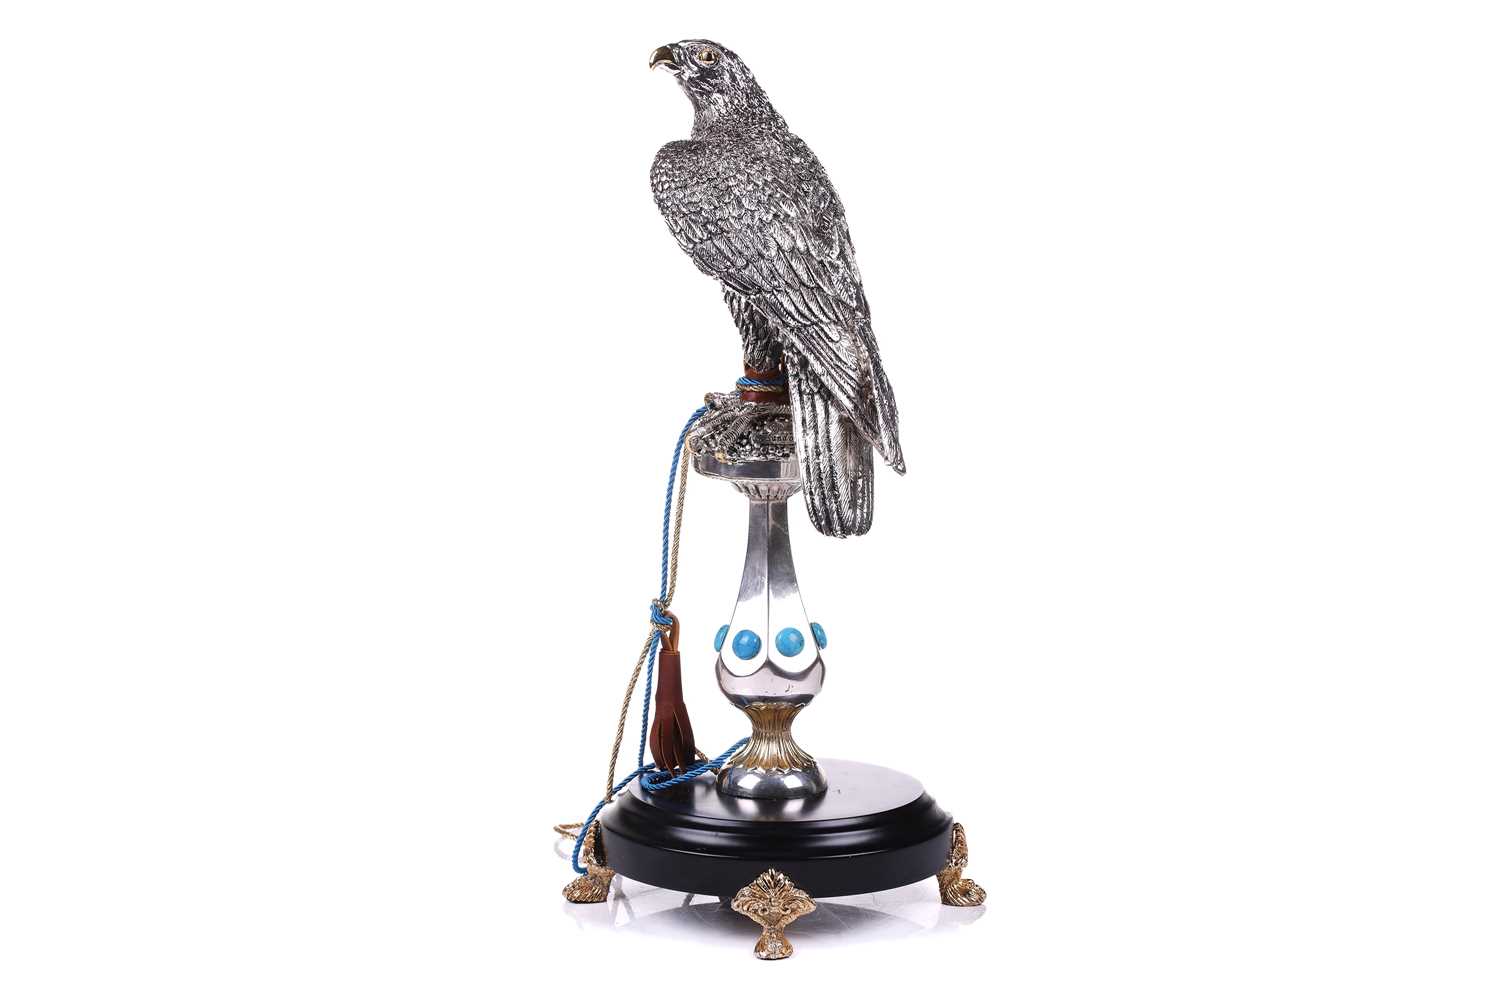 Lorenzo Sandomar, a large model of a silver and gold plated falcon, marked 925, standing on a - Image 4 of 10